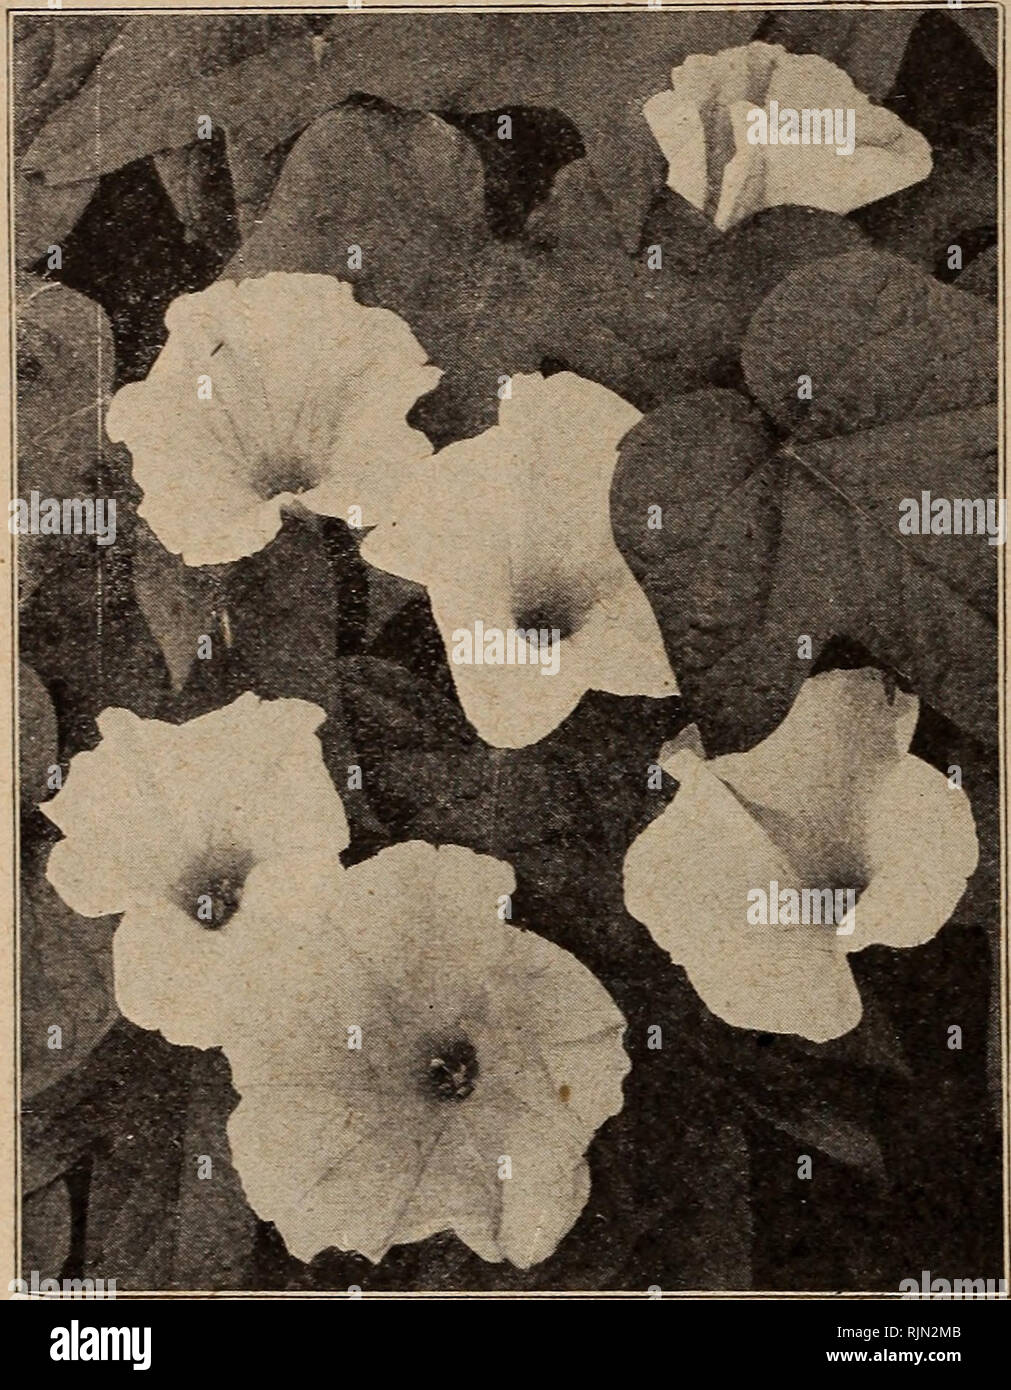 . Barnard's seeds, bulbs, shrubs 1921. Seeds Catalogs; Vegetables Seeds Catalogs; Flowers Seeds Catalogs; Fruit Seeds Catalogs; Nurseries (Horticulture) Catalogs. 60 The W. W. Barnard Co., 231-235 W. Madison St., Chicago ICE PLANT Tender annual of drooping habit. Useful in baskets and vases. Has peculiar leaves covered with small pustules. 3155—Crystallinum. Fine for pots 10c IMPATIENS (Zanzibar Balsam) G. P. 1 foot. Valuable for pot culture as well as bedding. The delicate flowers are very pretty and constantly in bloom. 3160— Holstii. Vermilion 10c 3161— Sultani. Bright rose 10c 3166—Sultani Stock Photo